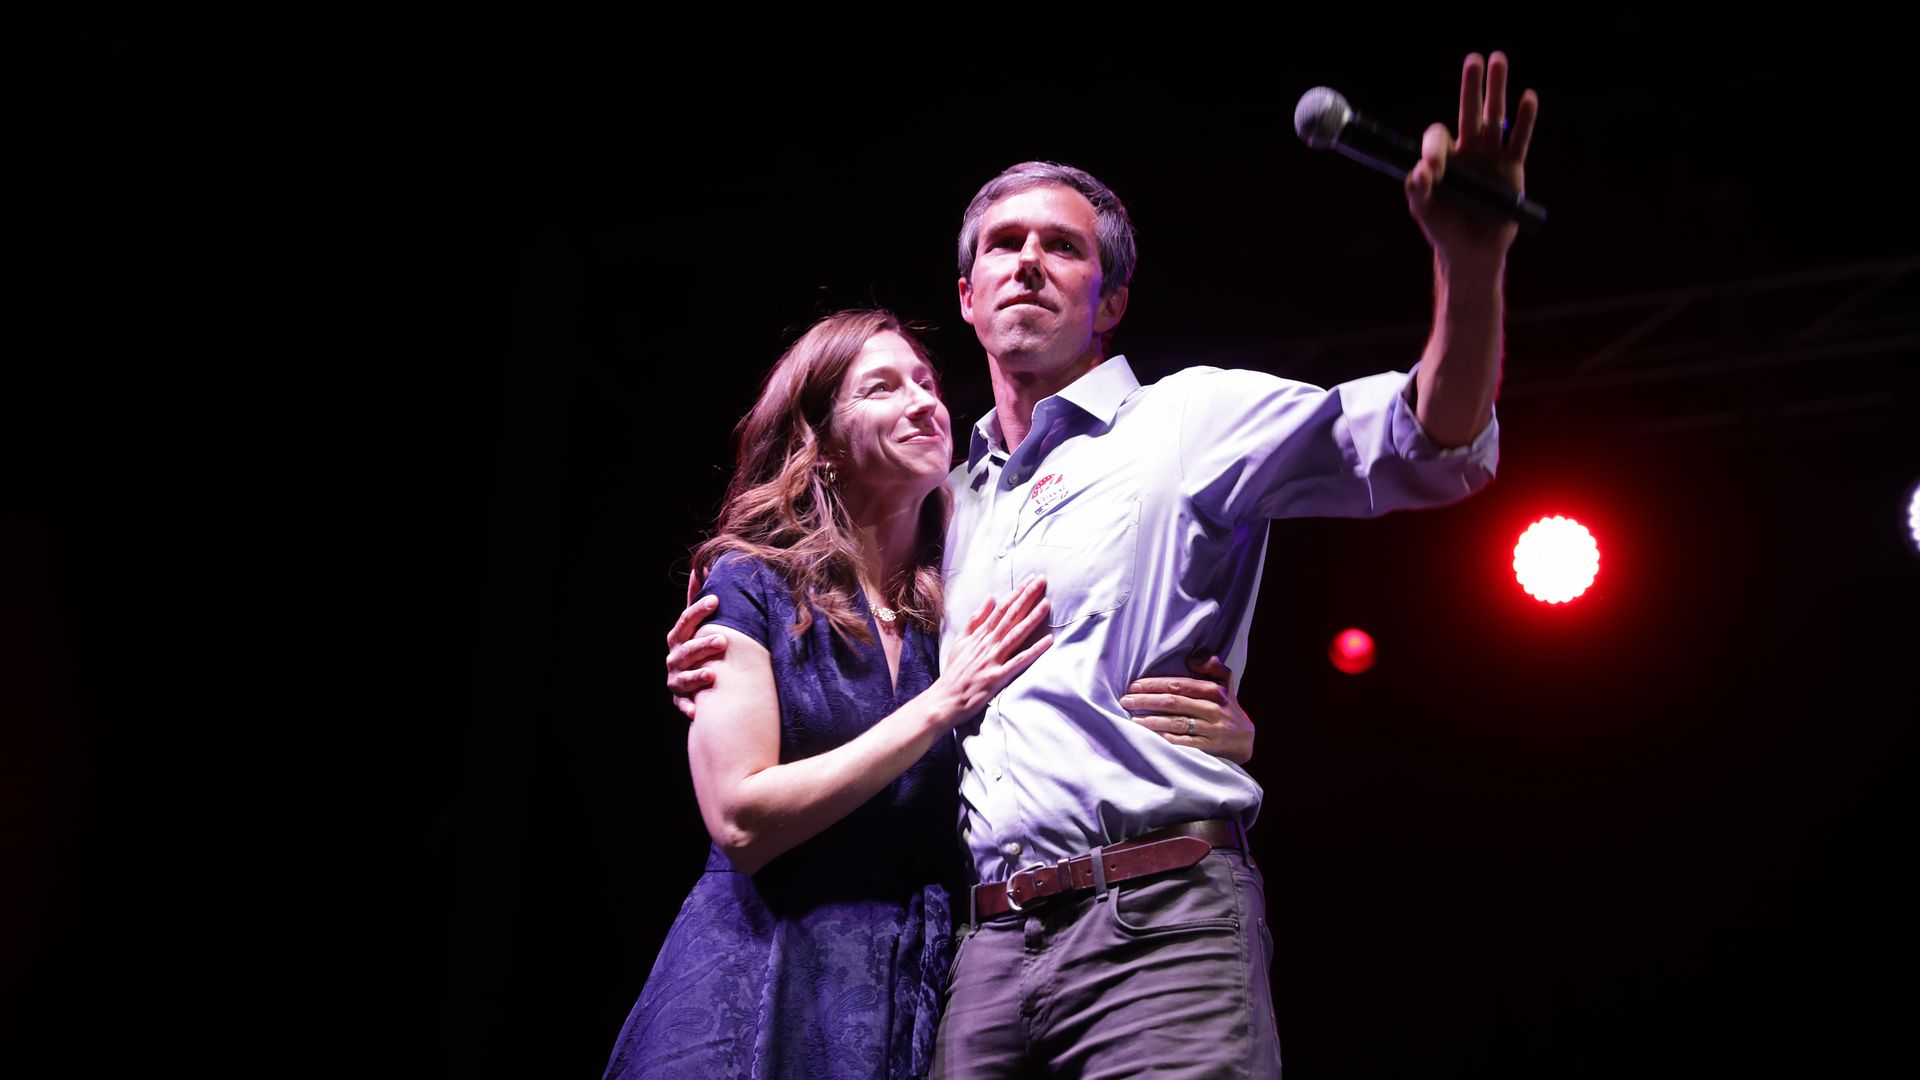  Beto O'Rourke and wife Amy Sanders arrive onstage at Southwest University Park November 06, 2018 in El Paso, Texas.